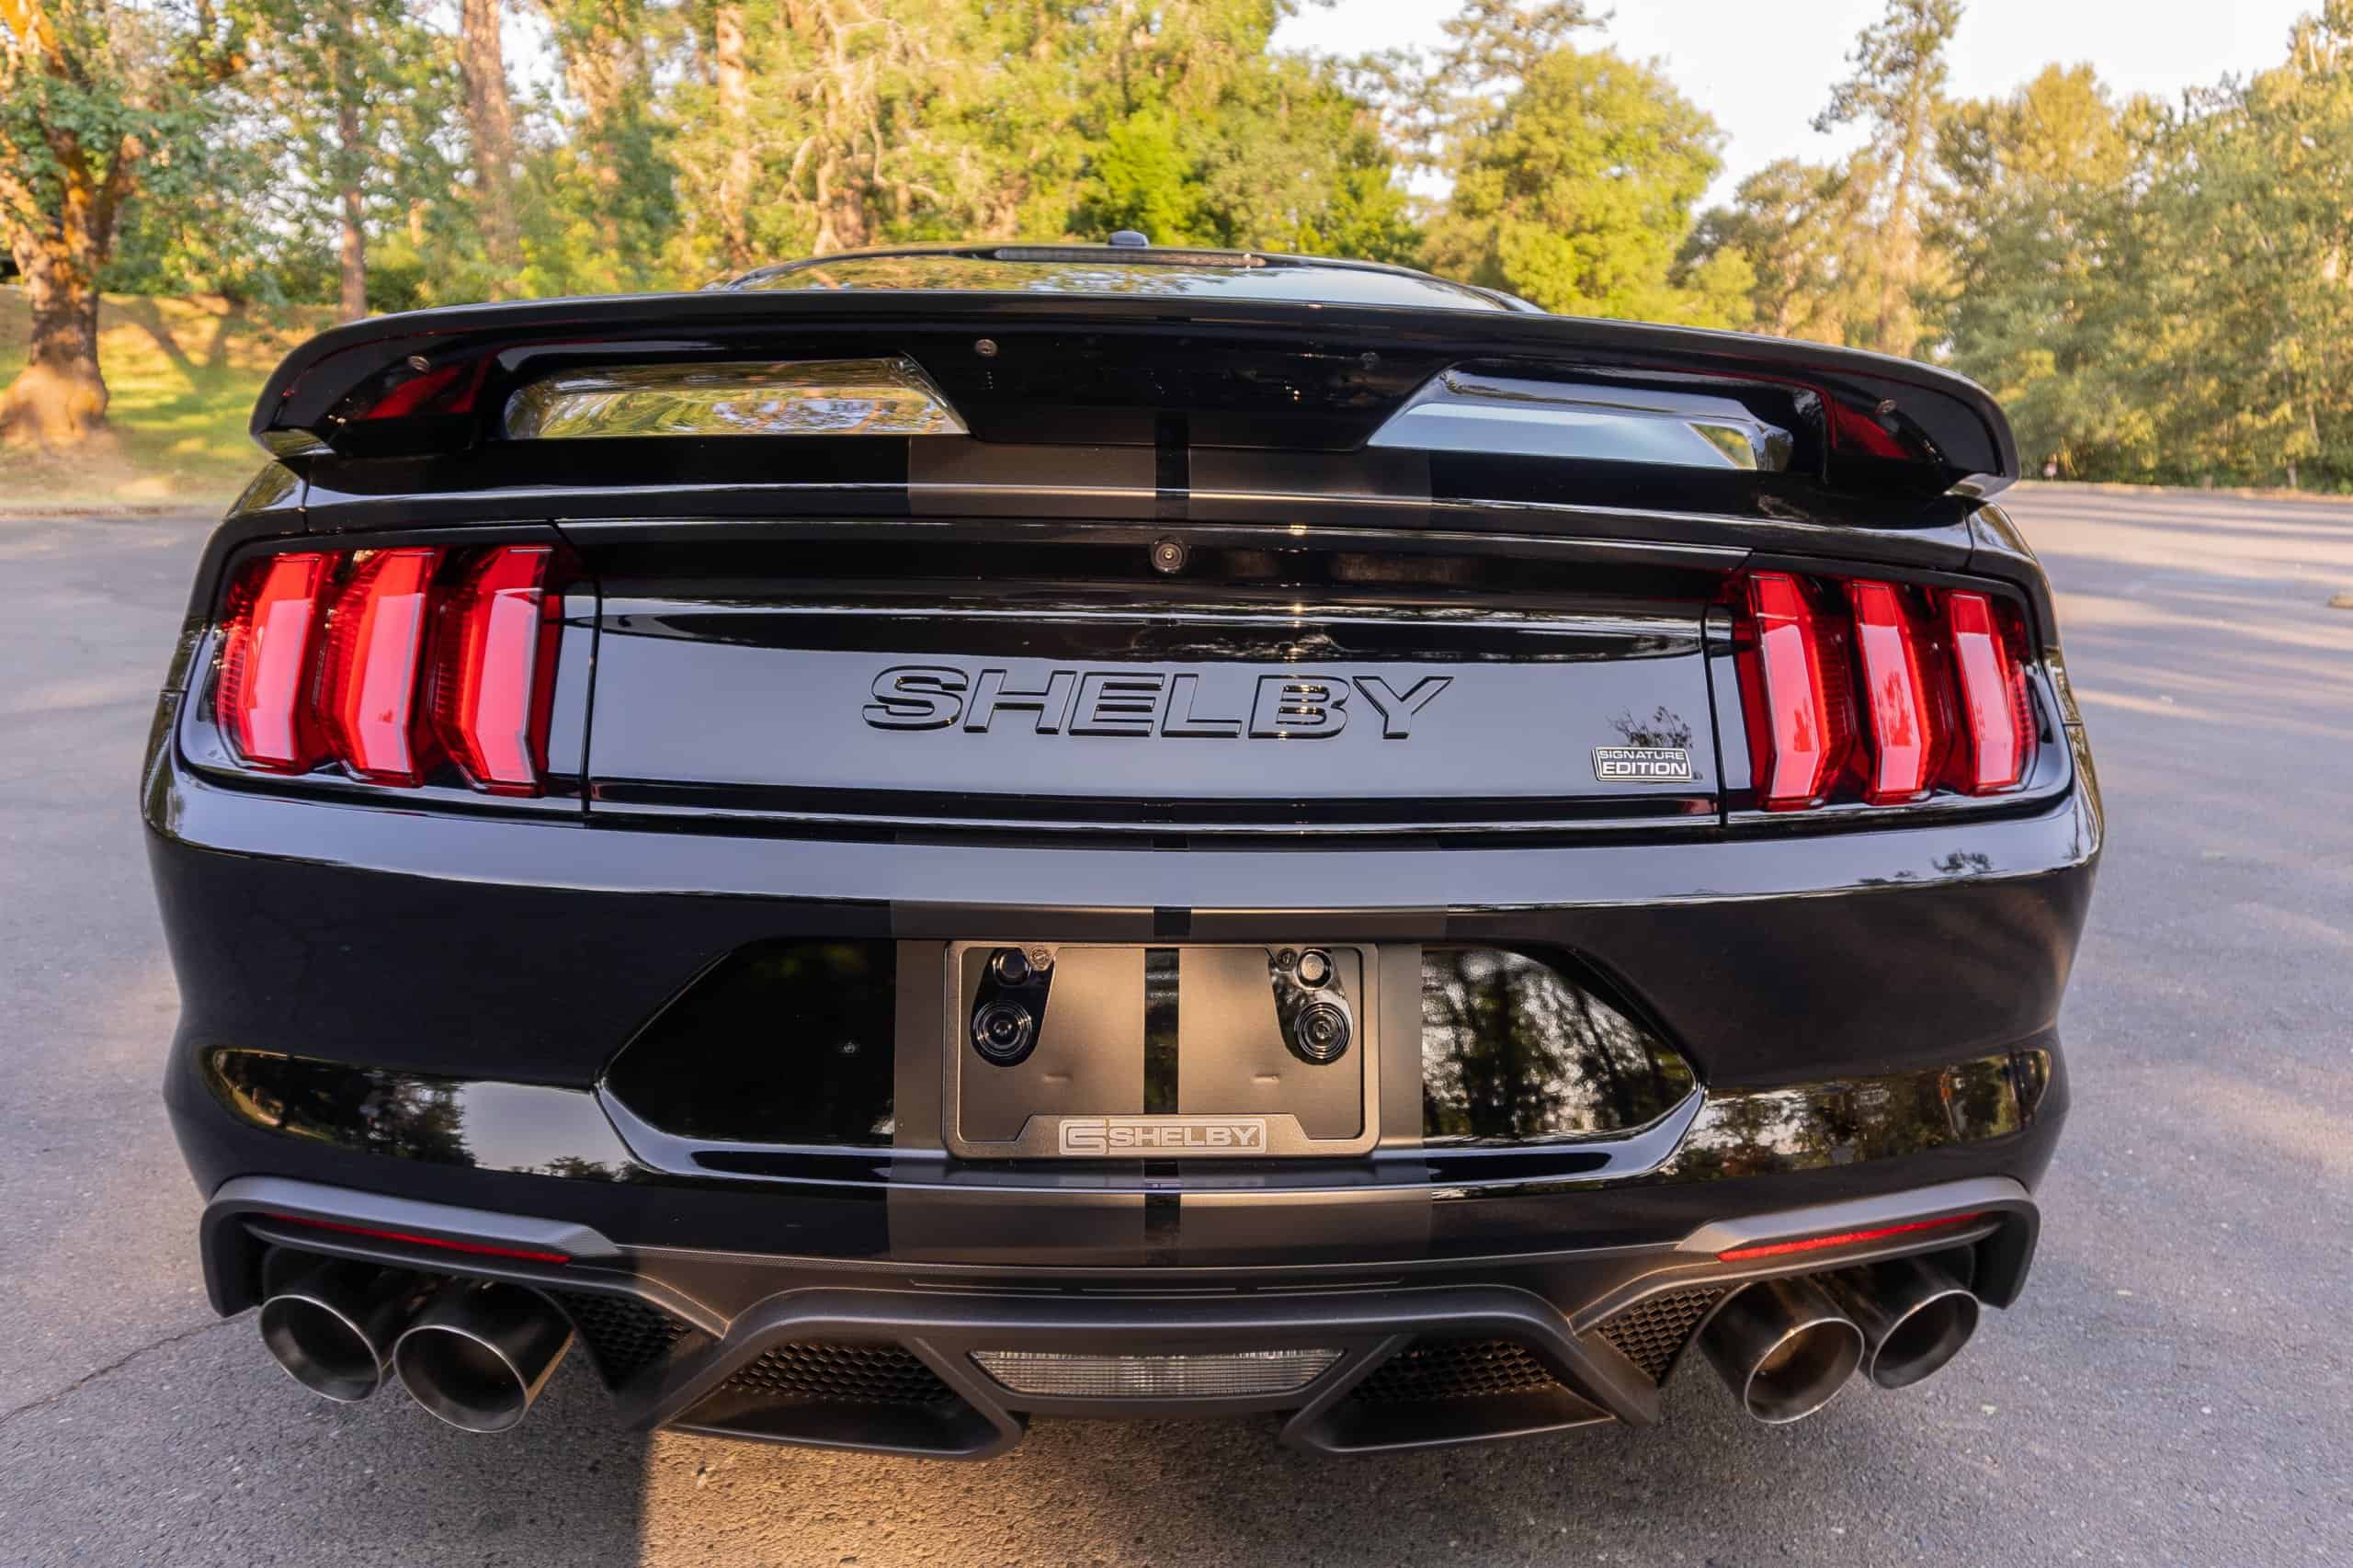 Shelby GT500 Carroll Shelby signature edition on AutoHunter